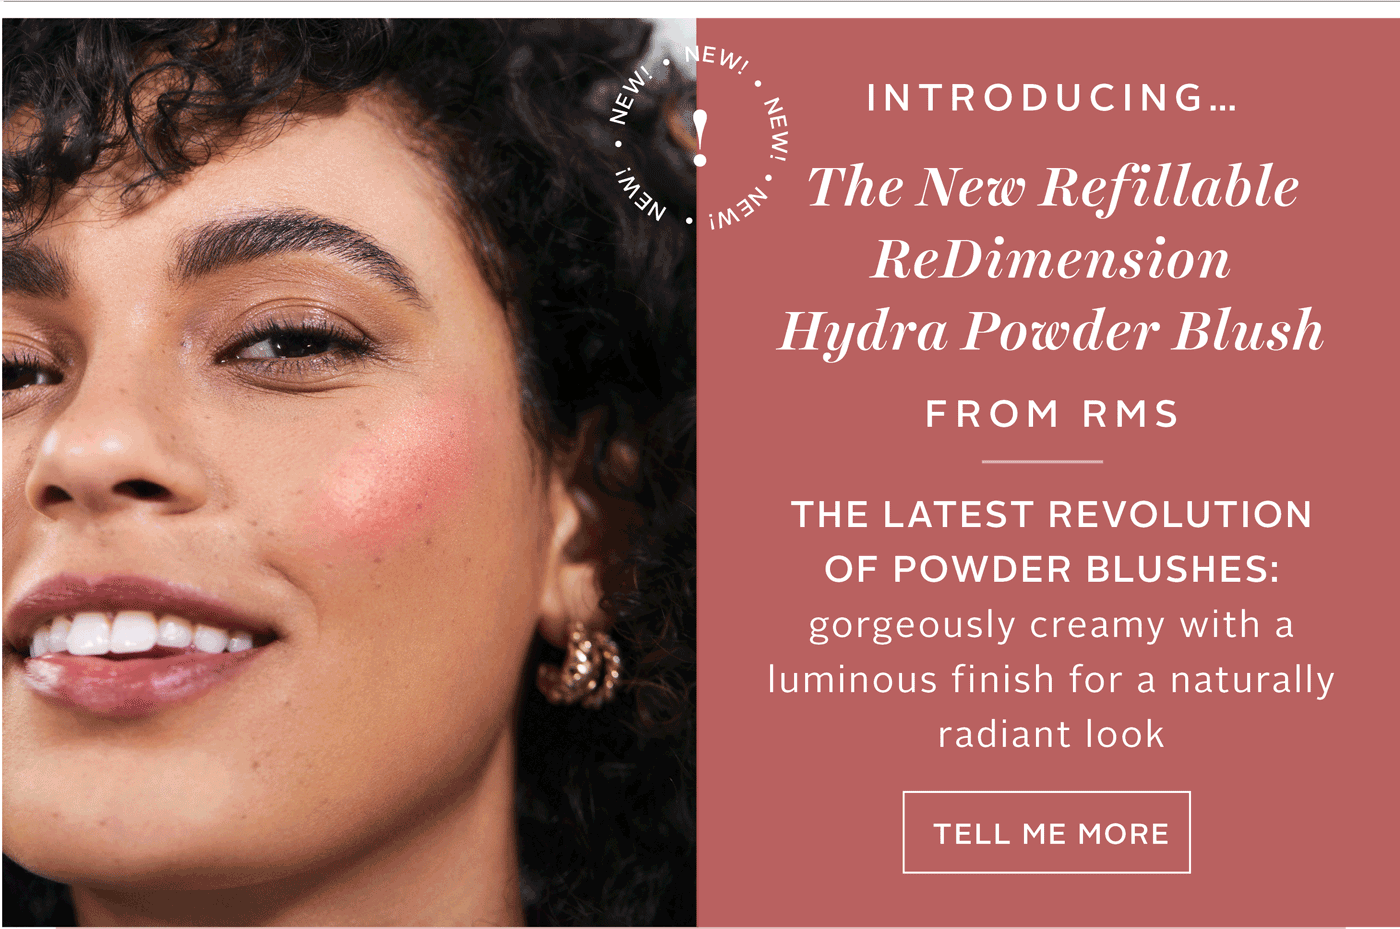 NEW FROM RMS: MEET THE REDIMENSION HYDRA POWDER BLUSH.